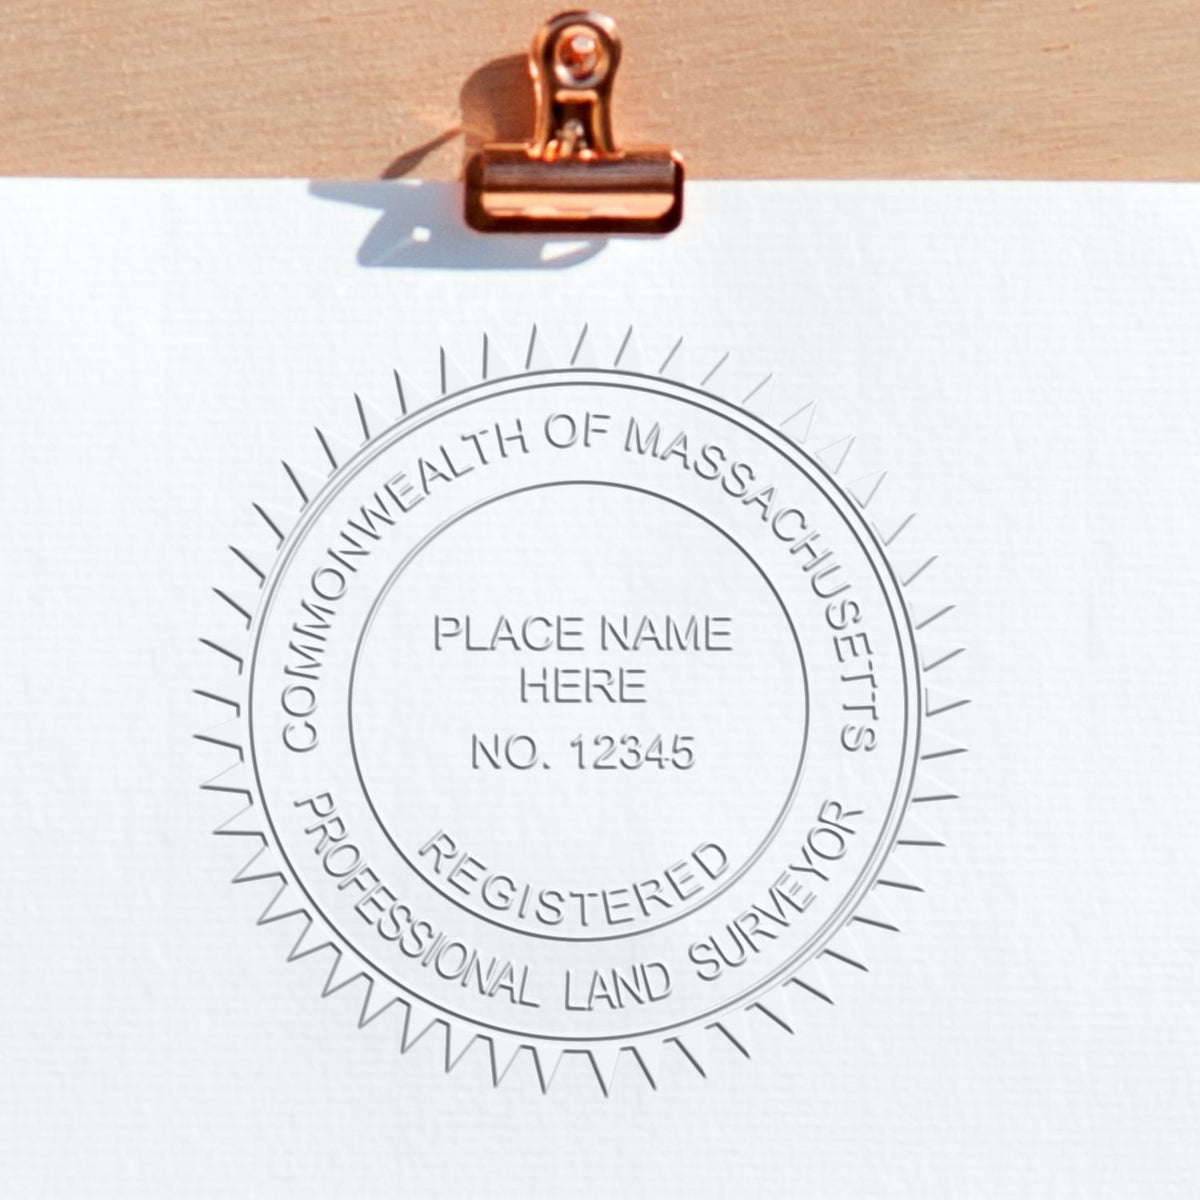 A stamped impression of the Handheld Massachusetts Land Surveyor Seal in this stylish lifestyle photo, setting the tone for a unique and personalized product.